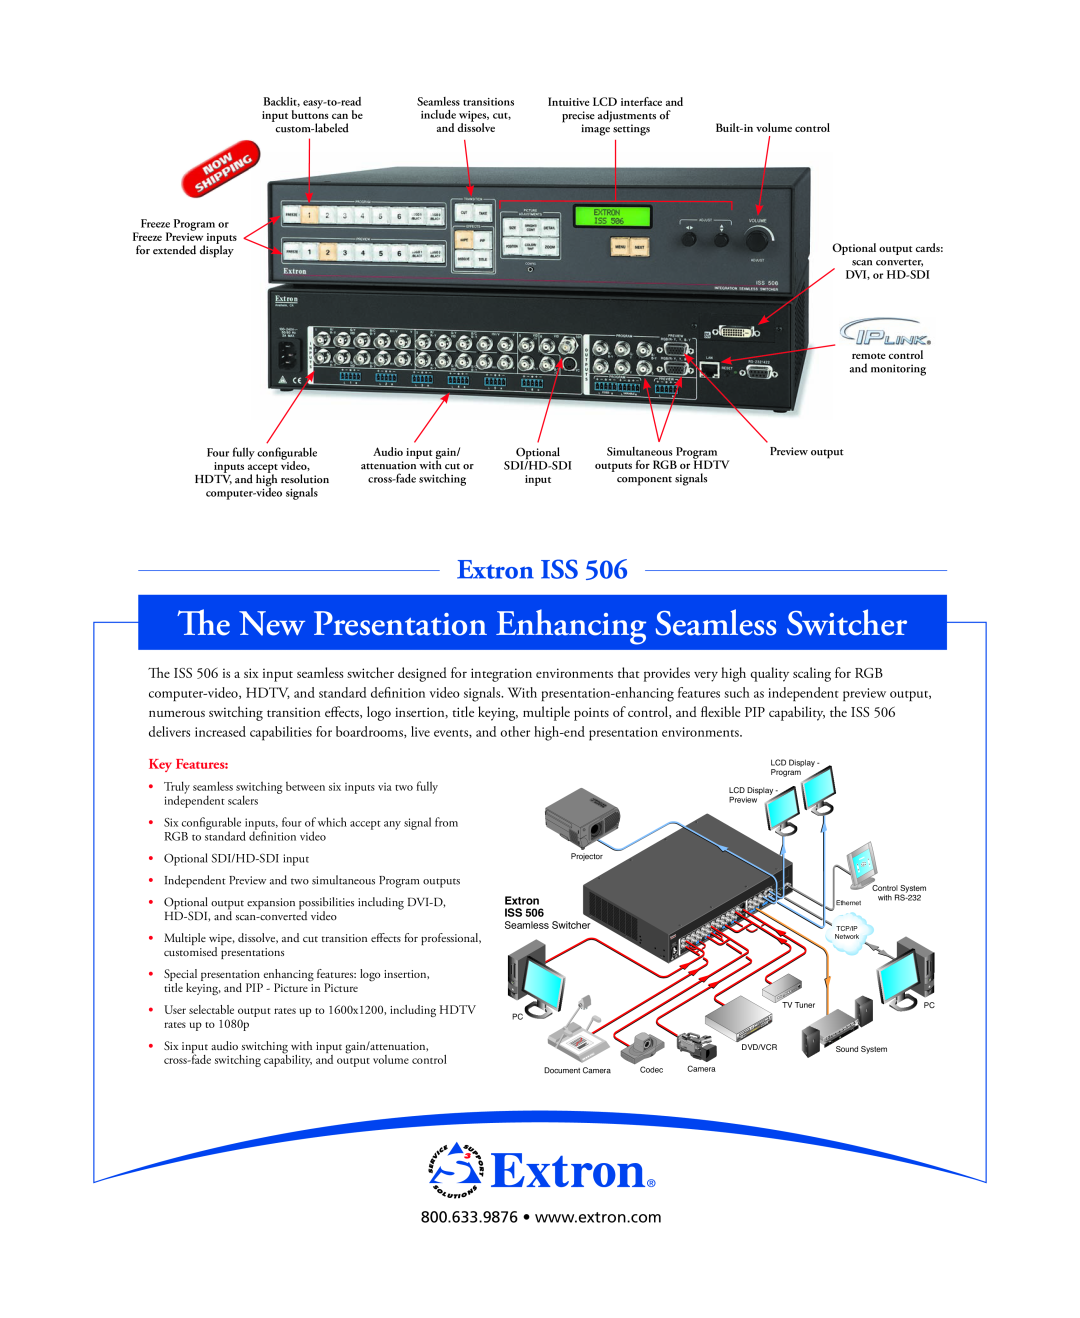 Extron electronic ISS 506 manual The New Presentation Enhancing Seamless Switcher, Extron ISS, Key Features 